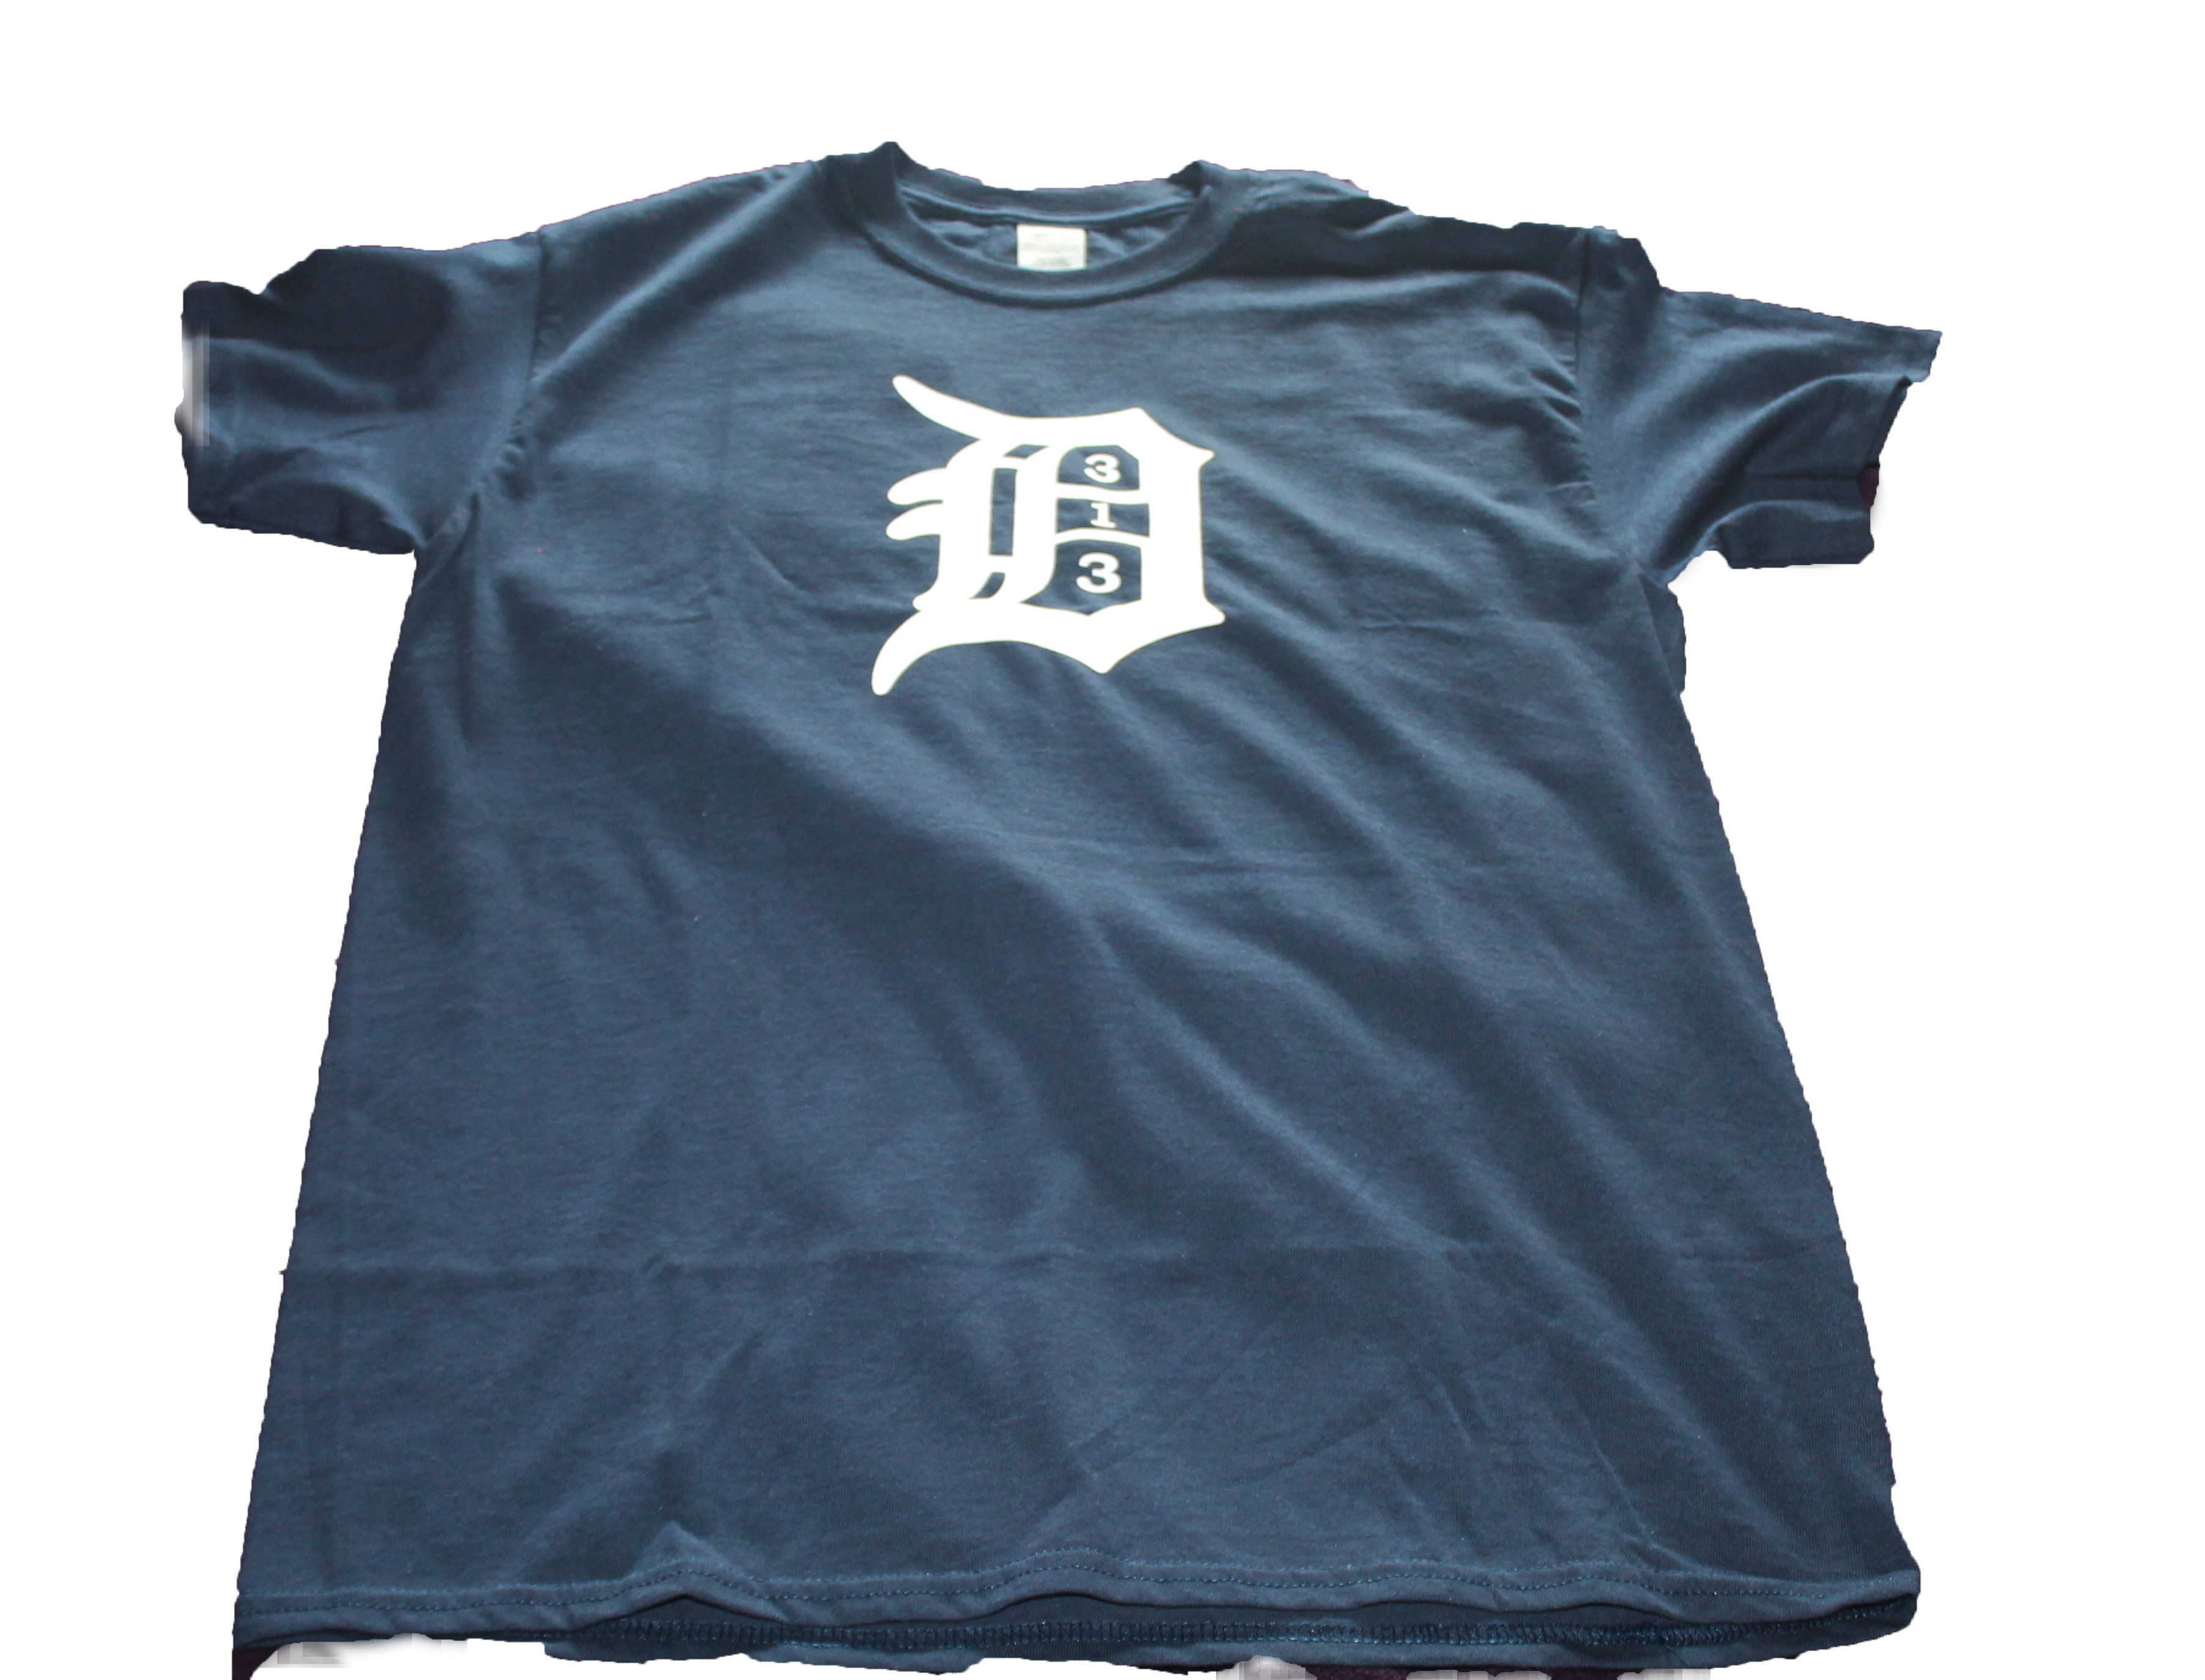 Old English D 313 (NAVY) 00186